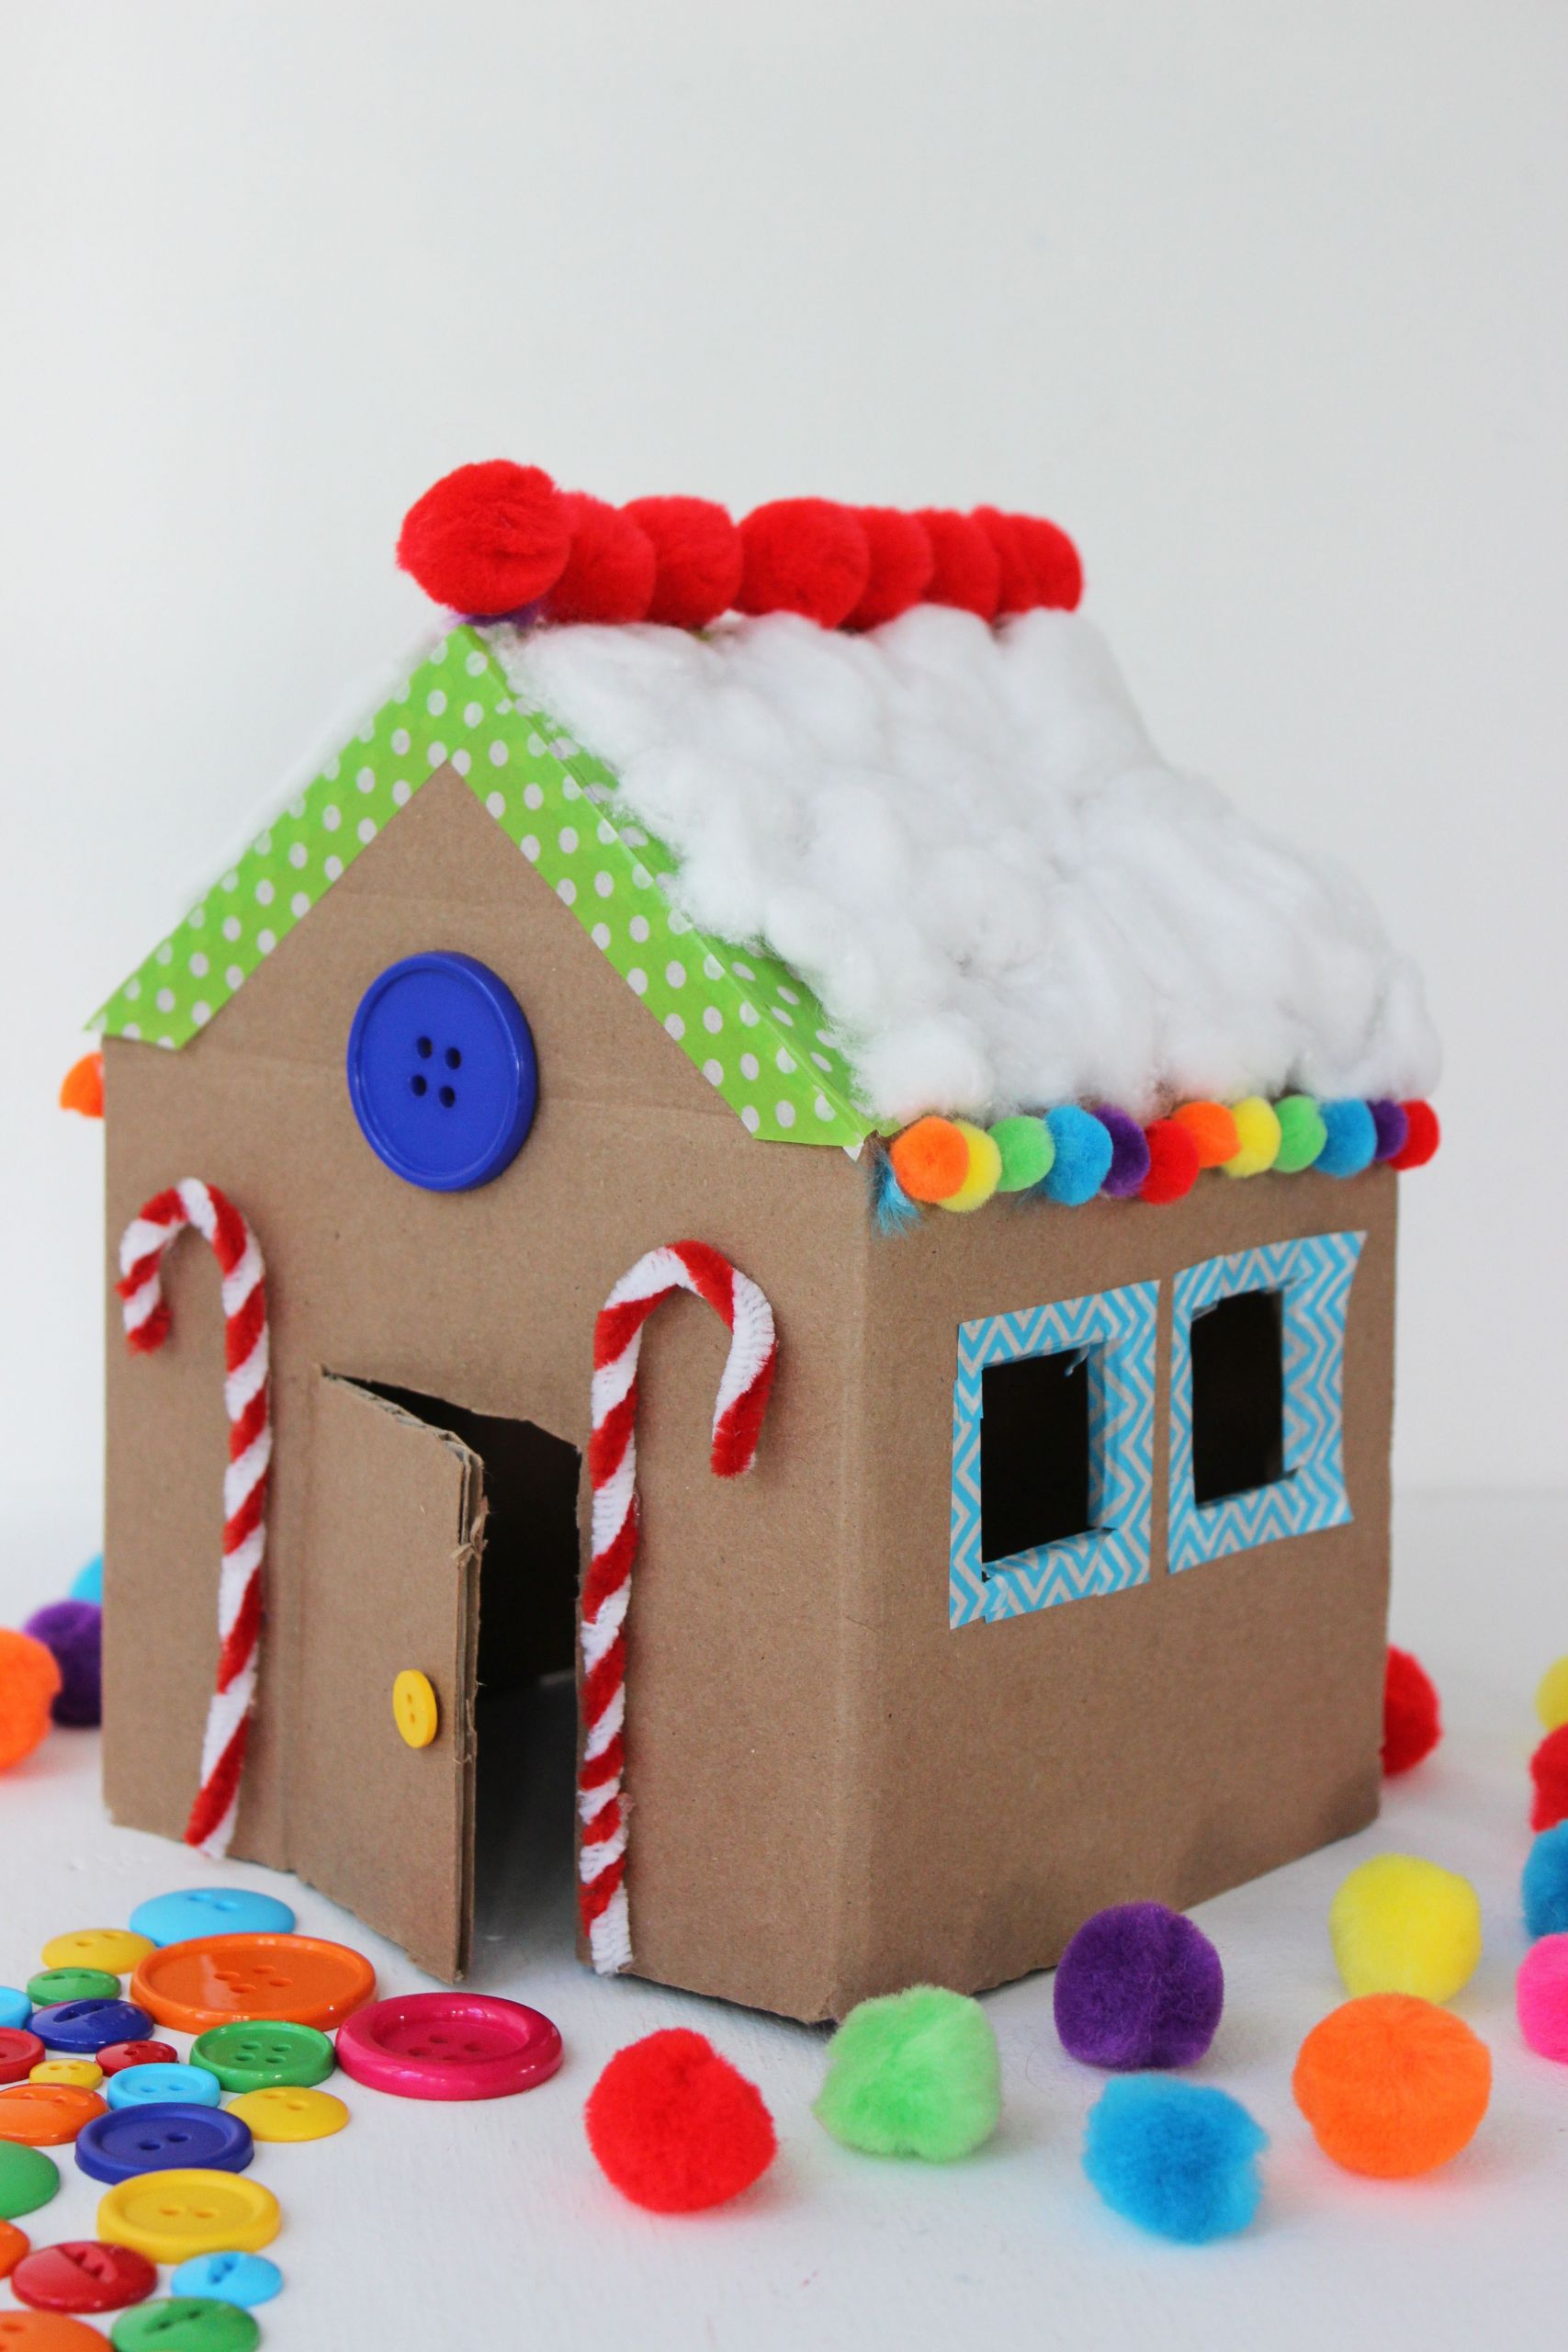 Craft Ideas For Children
 10 ways to turn you cardboard boxes into kids’ crafts